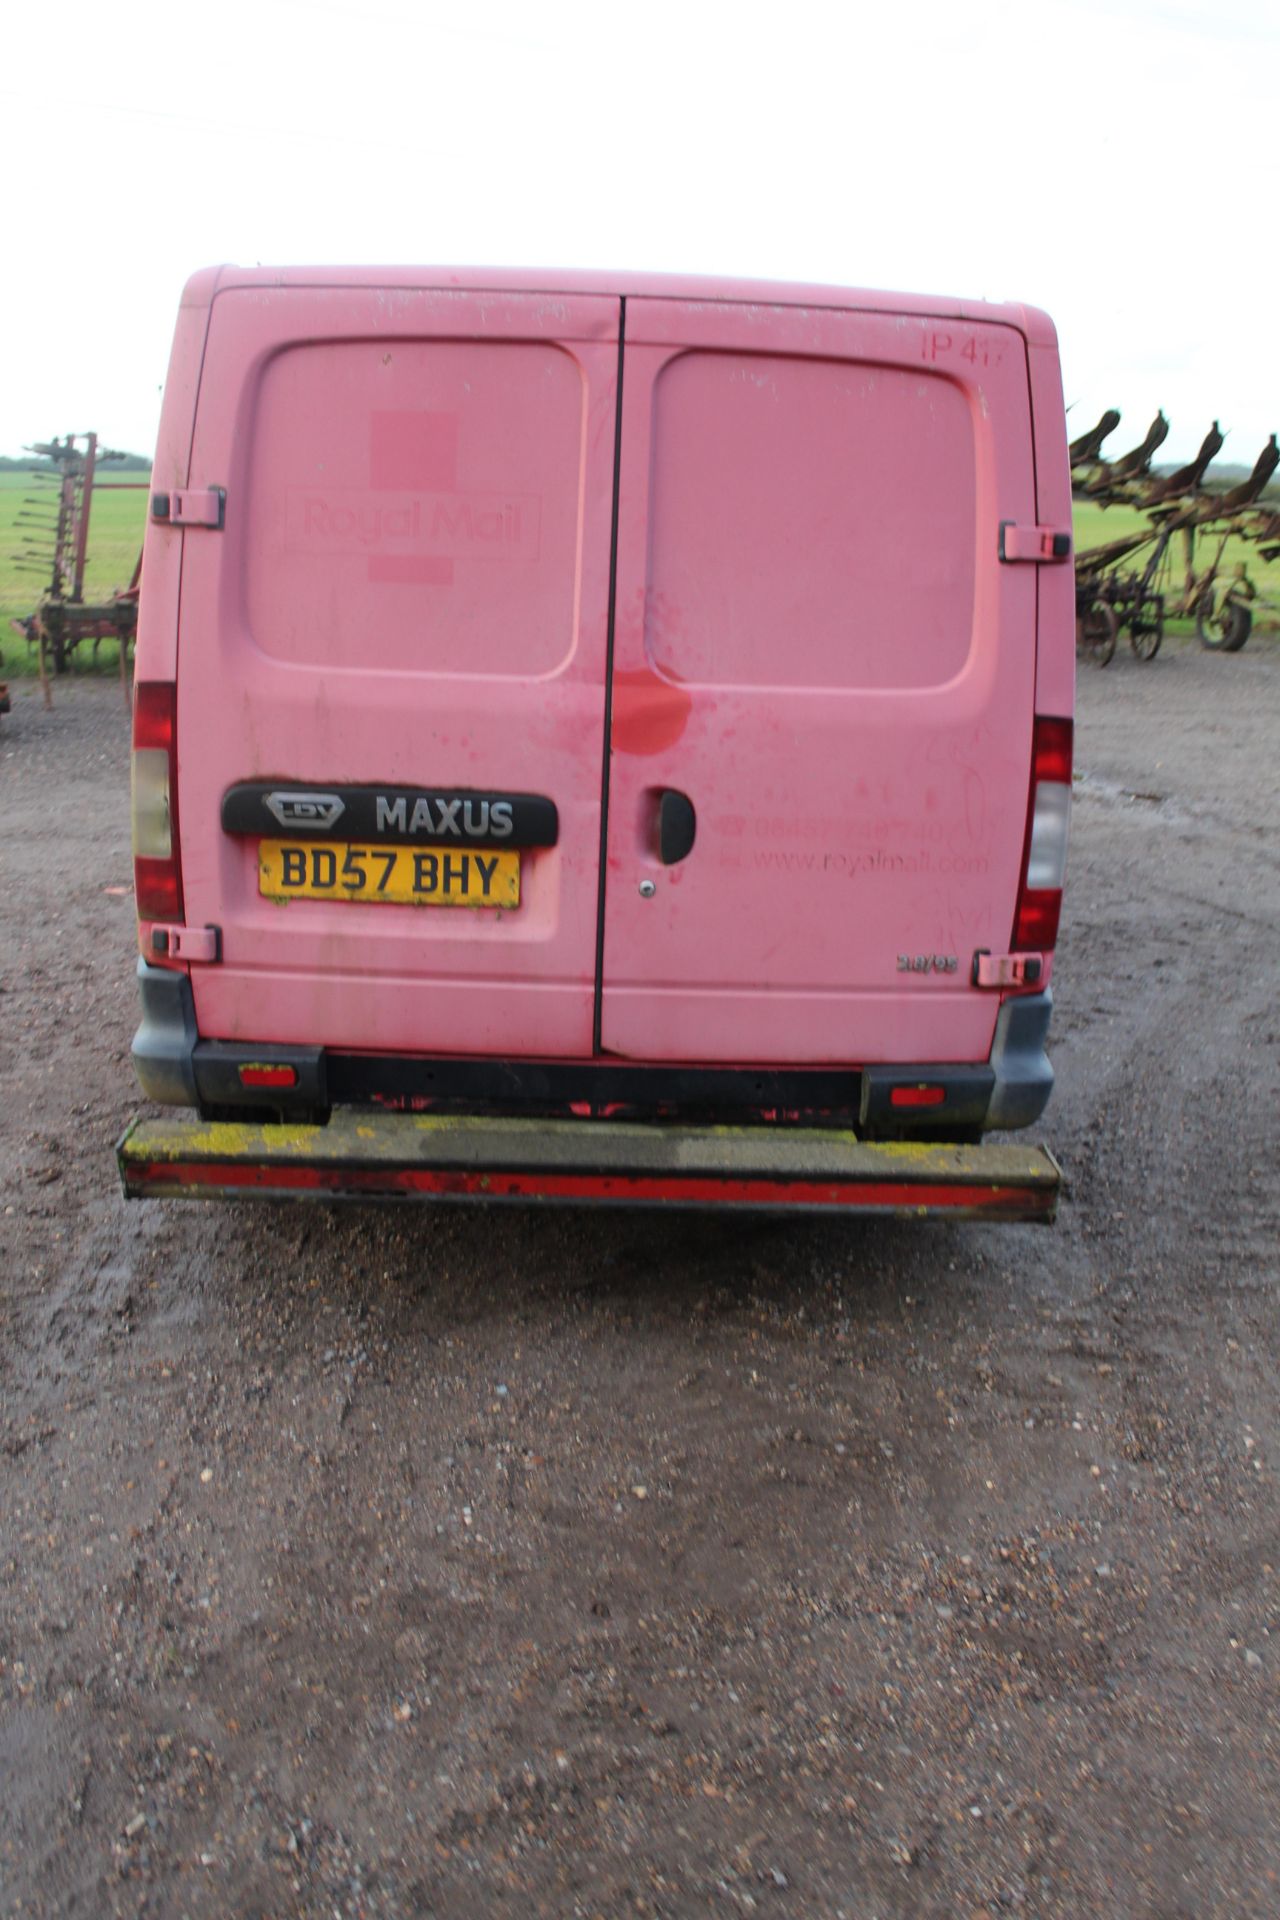 **UPDATED DESCRIPTION** LDV 2.8/95 Maxus crew cab panel van. Registration BD57 BHY. Date of first - Image 4 of 52